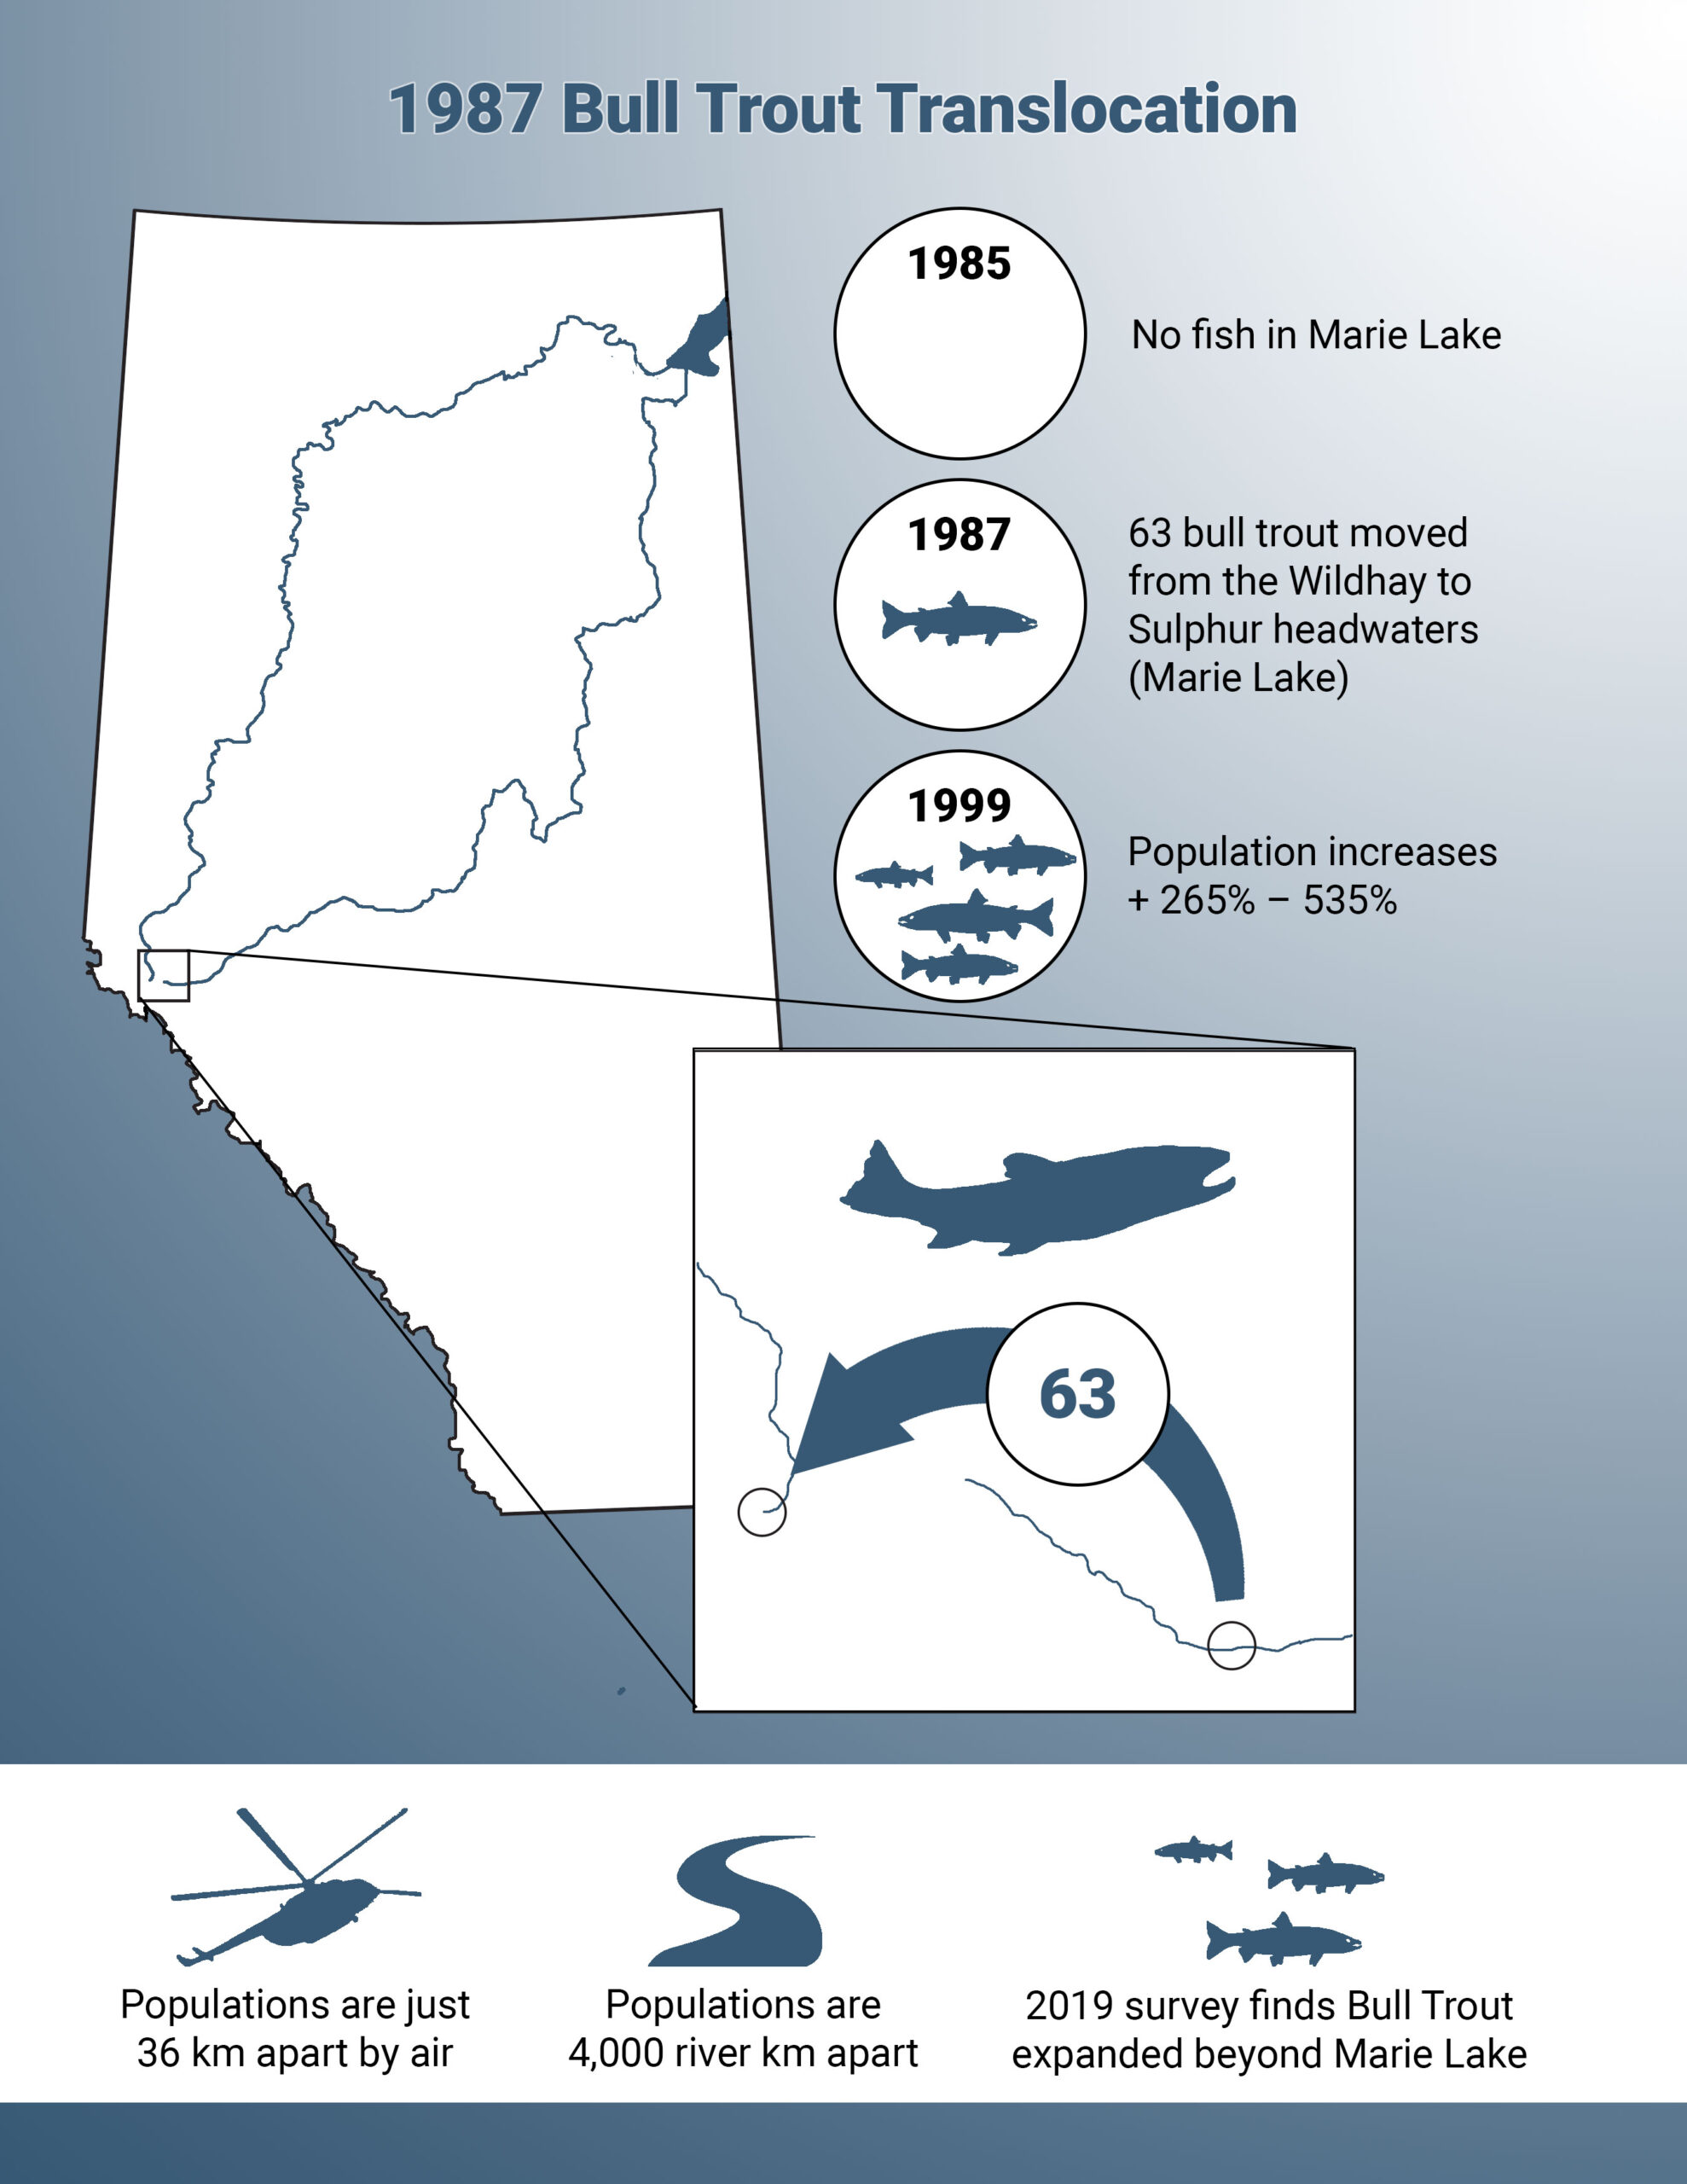 1987 Bull trout translocation 1985 no fish in marie lake 1987 63 bull trout moved from the wildhay to sulphur headwaters marie lake 1999 population increases plus 265 percent to 535 percent populations are just 36 kilometers apart by air but 4000 river kilometers apart 2019 survey finds bull trout expanded beyond marie lake